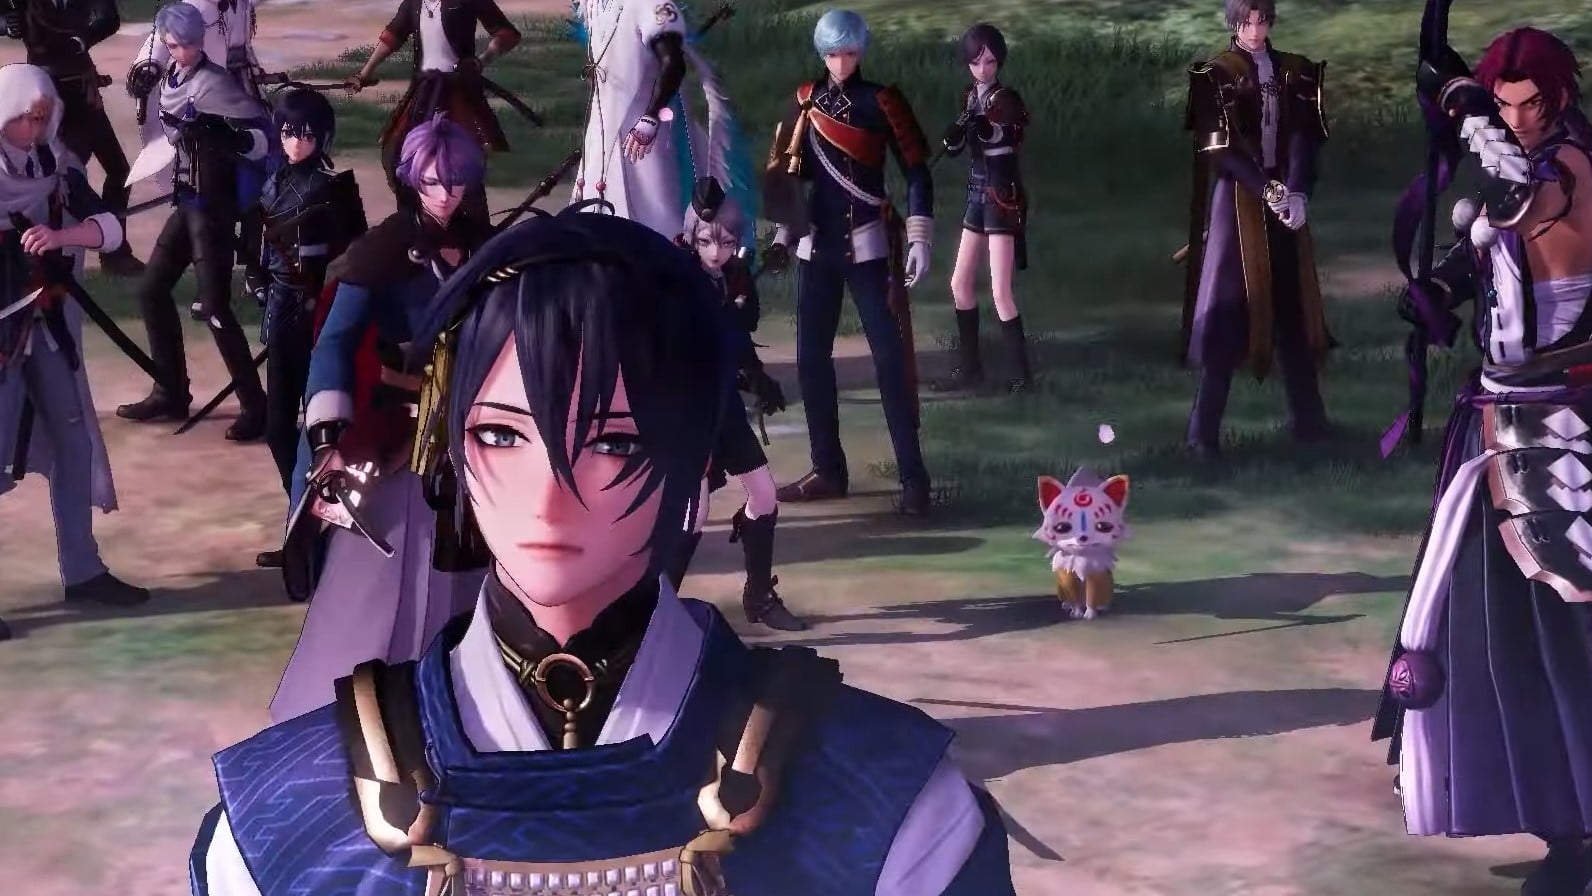 Touken Ranbu Warriors Gets Two New Trailers Showing the First Team and Gameplay Features